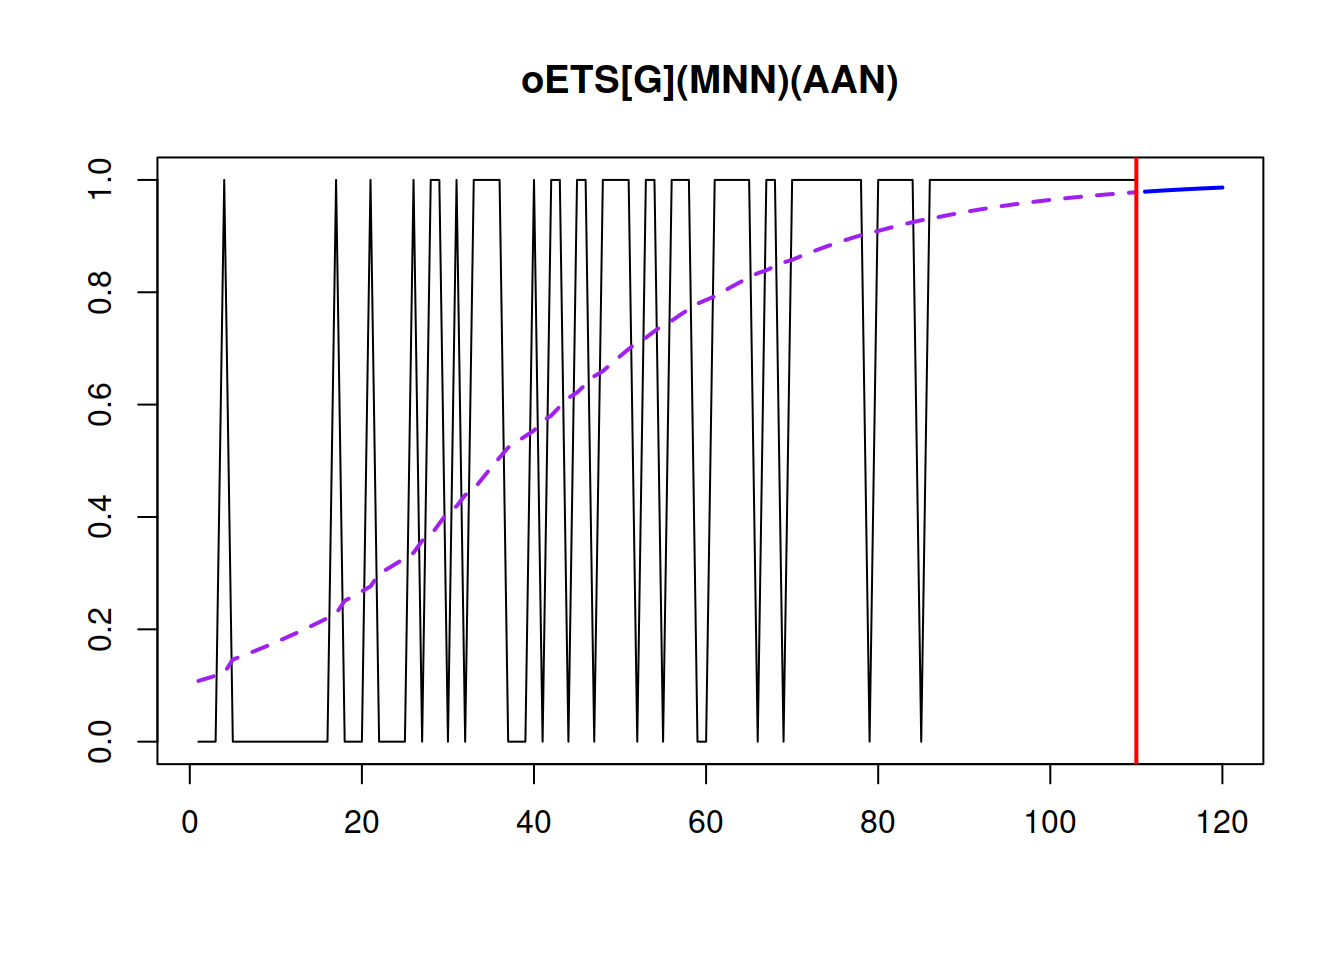 Demand occurrence and probability of occurrence in the oETS(M,N,N)(A,A,N)$_G$ model.